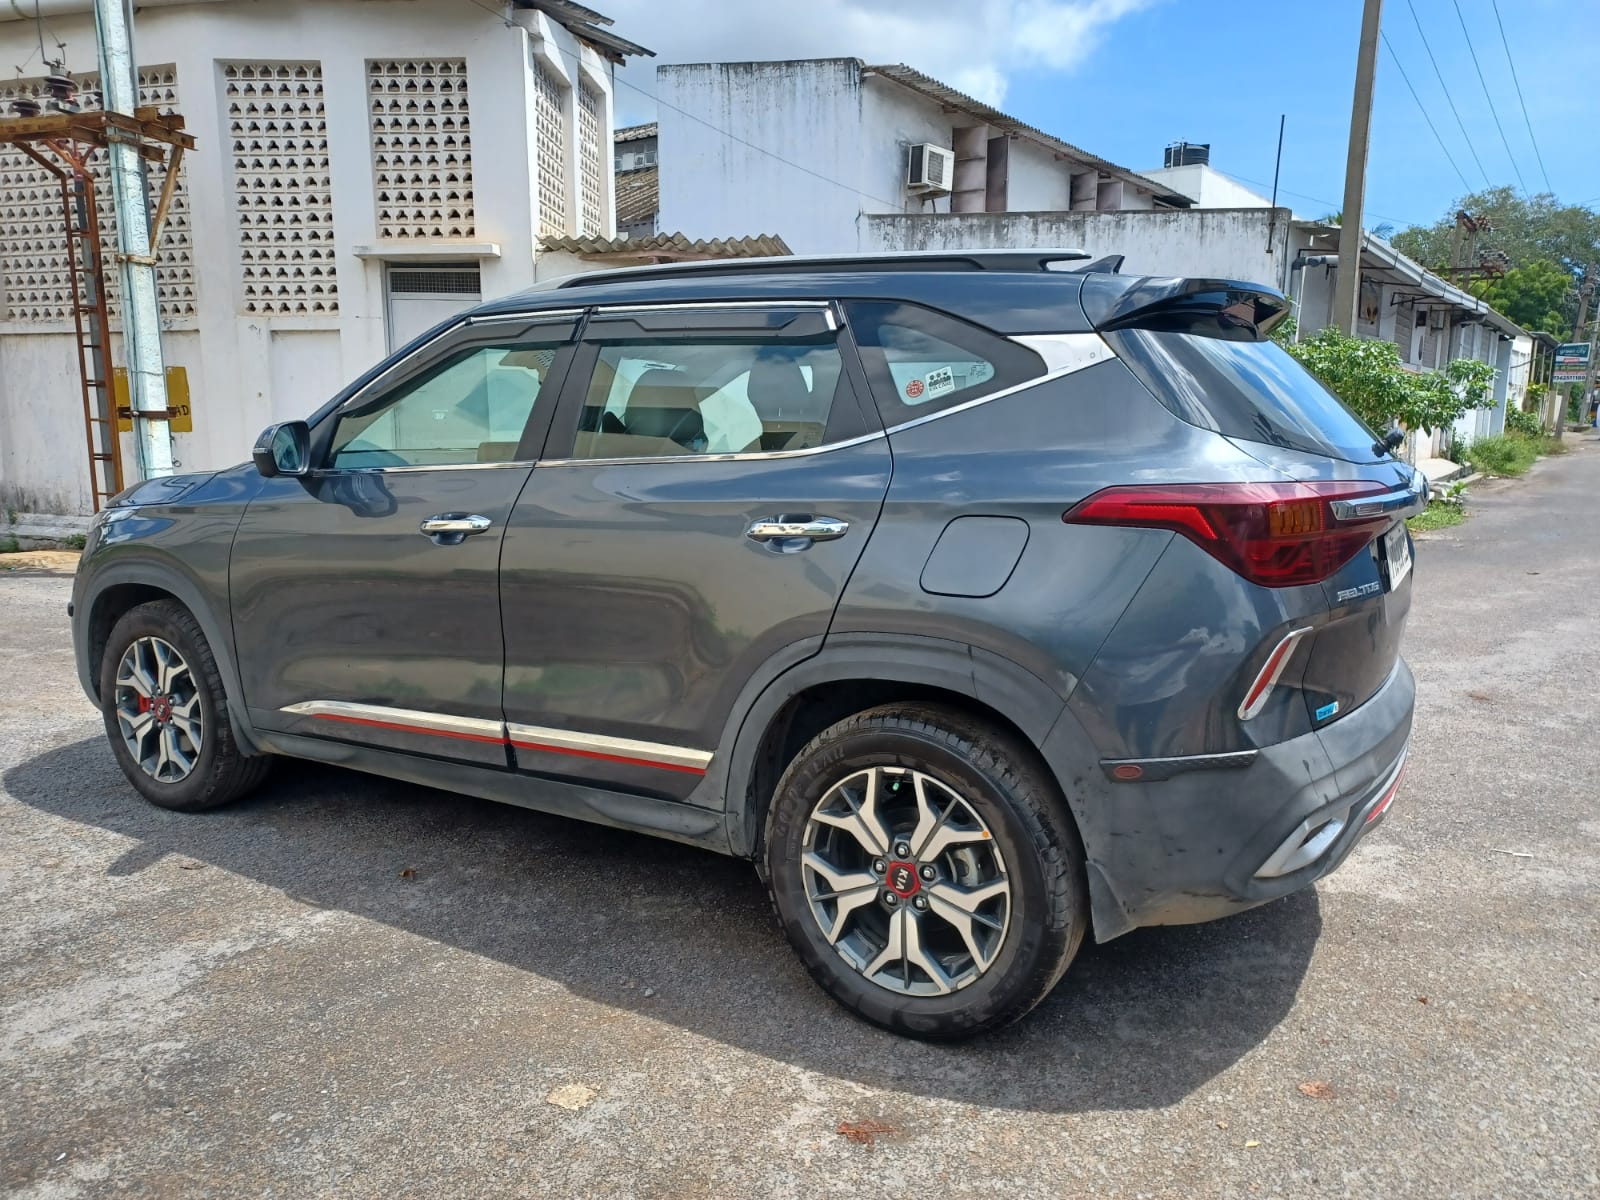 4664-for-sale-Kia-Seltos-Petrol-First-Owner-2020-PY-registered-rs-1525000